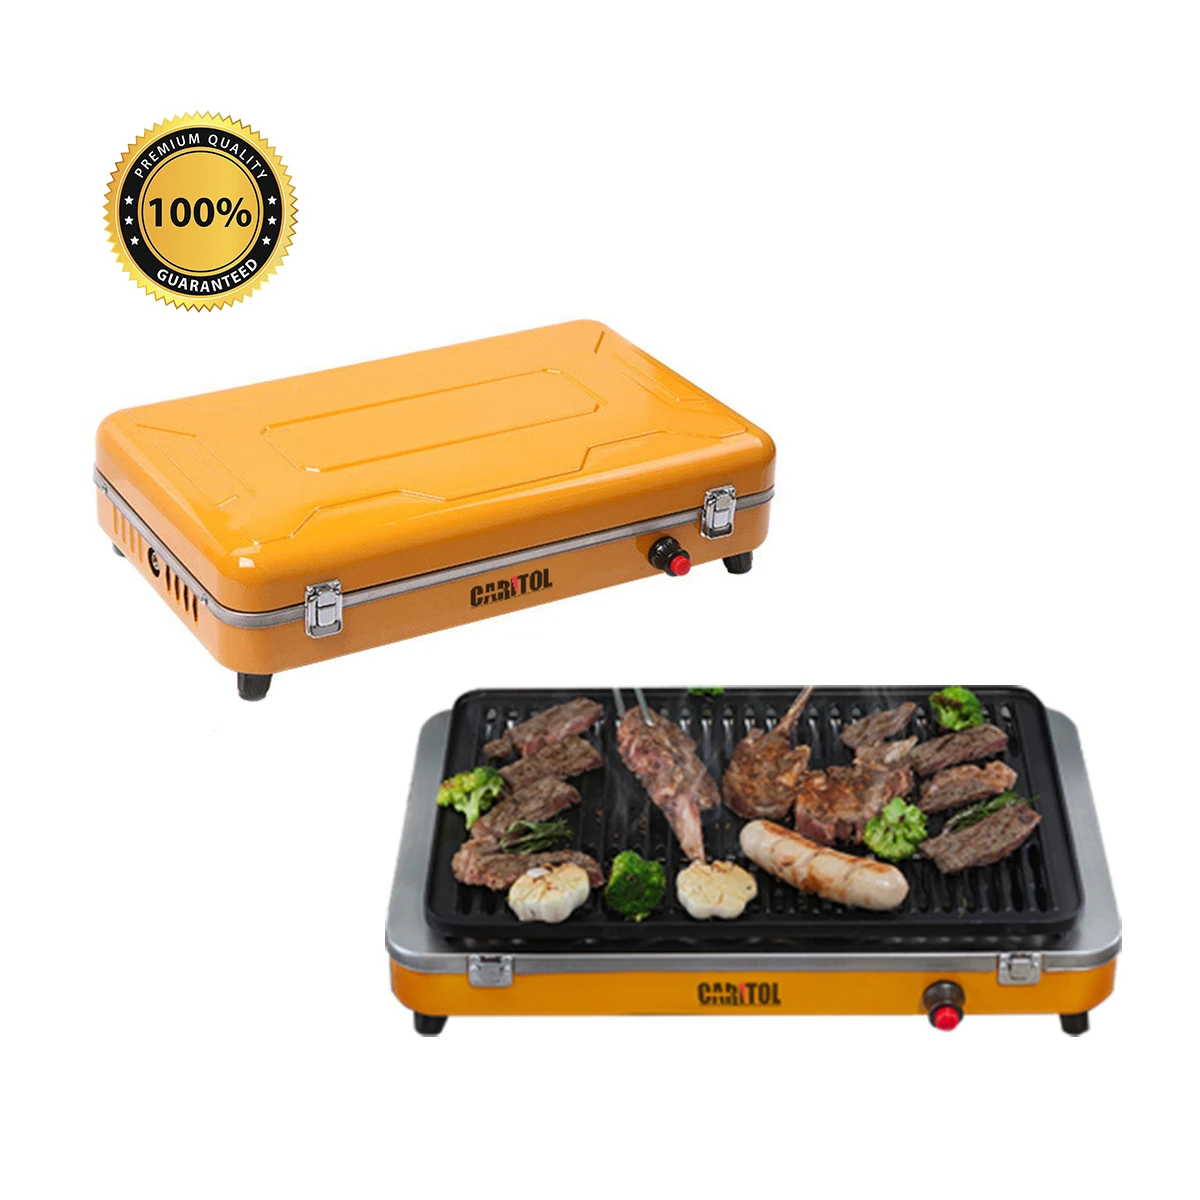 New High Quality Outdoor Gas Bbq Grill Barbecue Grill